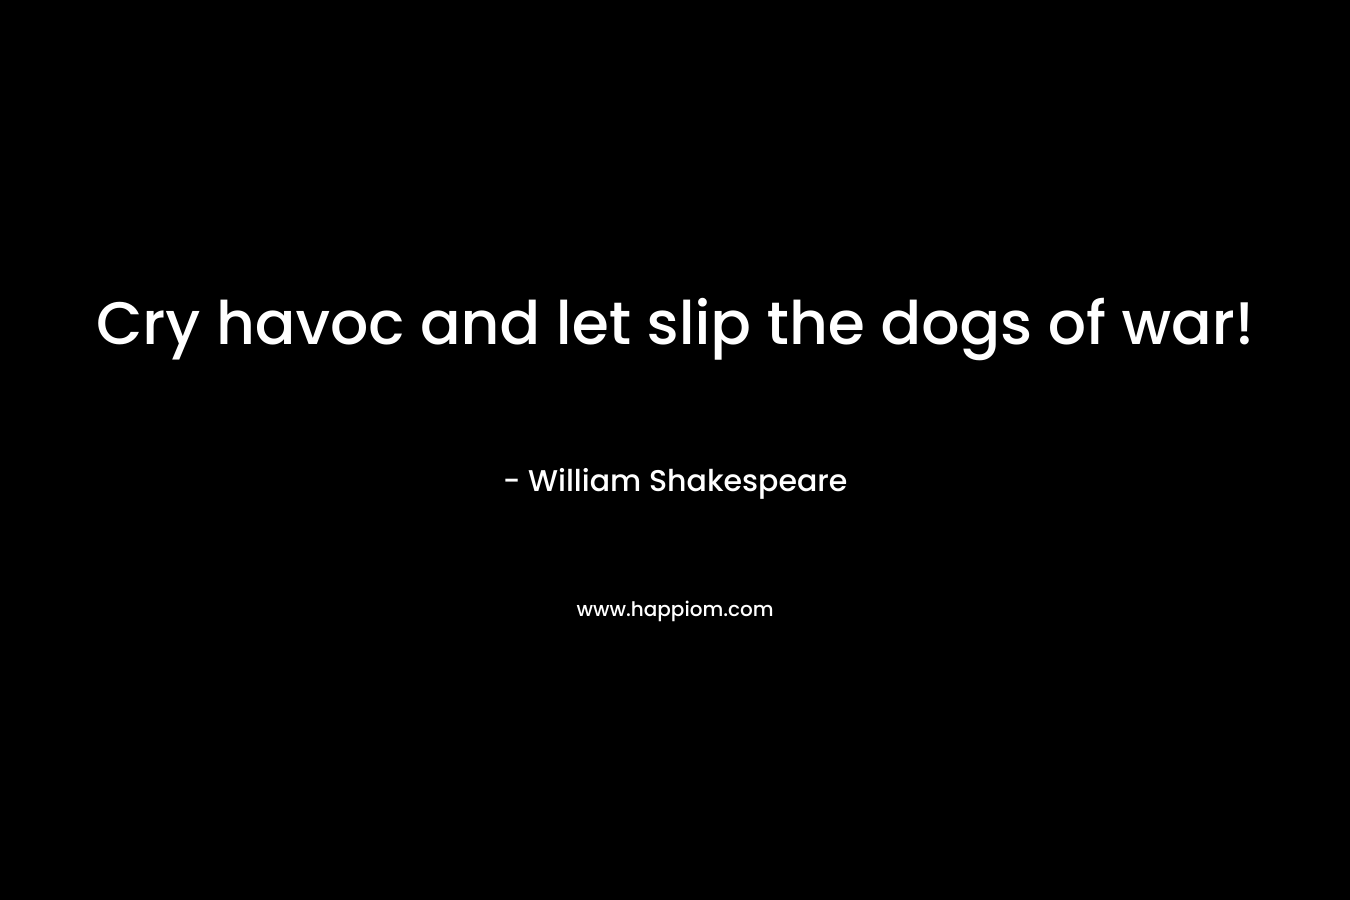 Cry havoc and let slip the dogs of war! – William Shakespeare